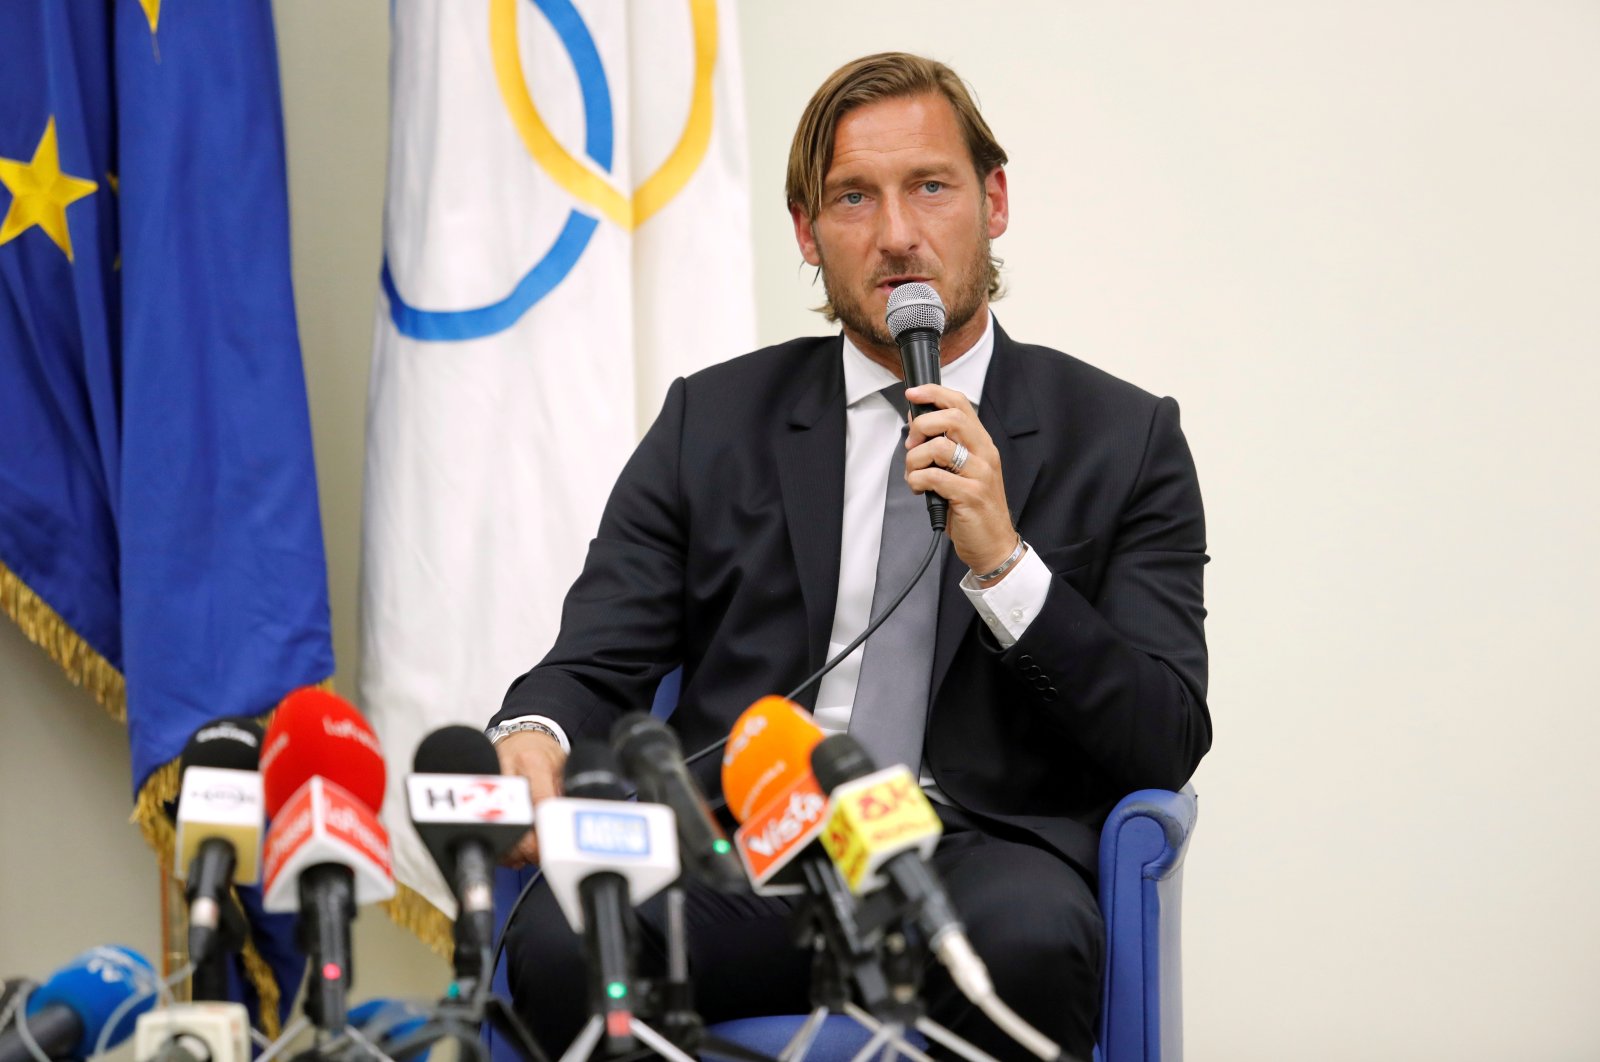 AS Roma's Francesco Totti speaks during a news conference at Coni Palace, Rome, Italy, June 17, 2019. (Reuters Photo)